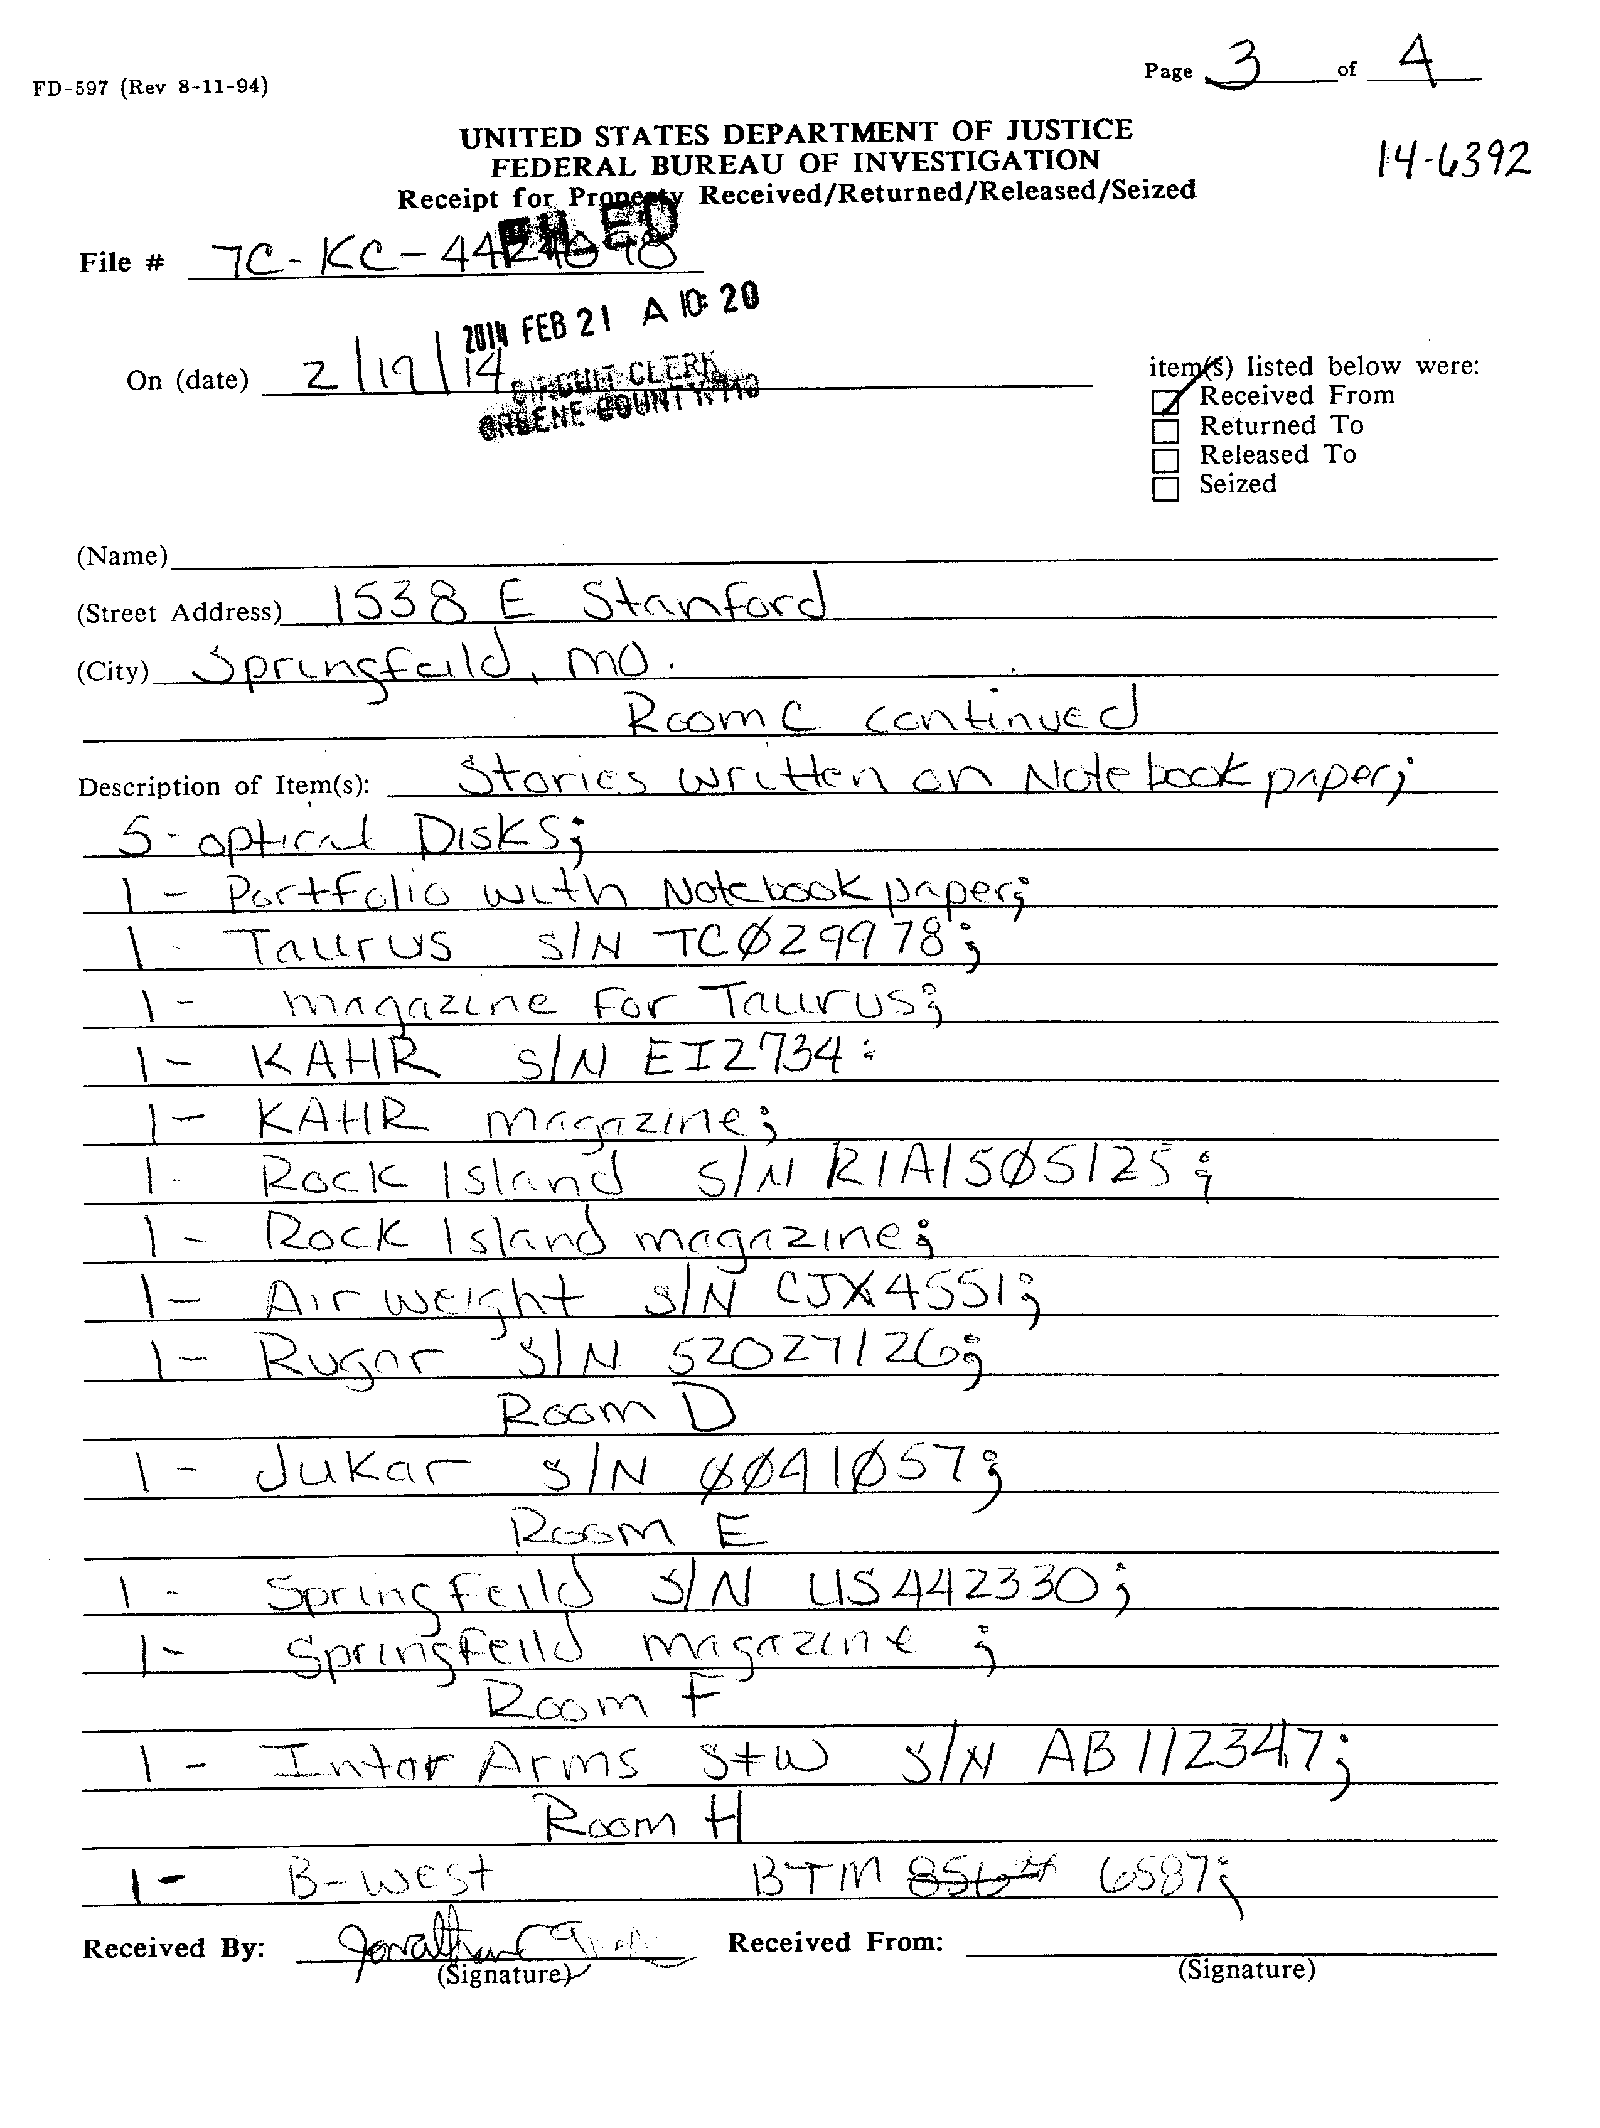 Copy of Search Warrant Return04.png